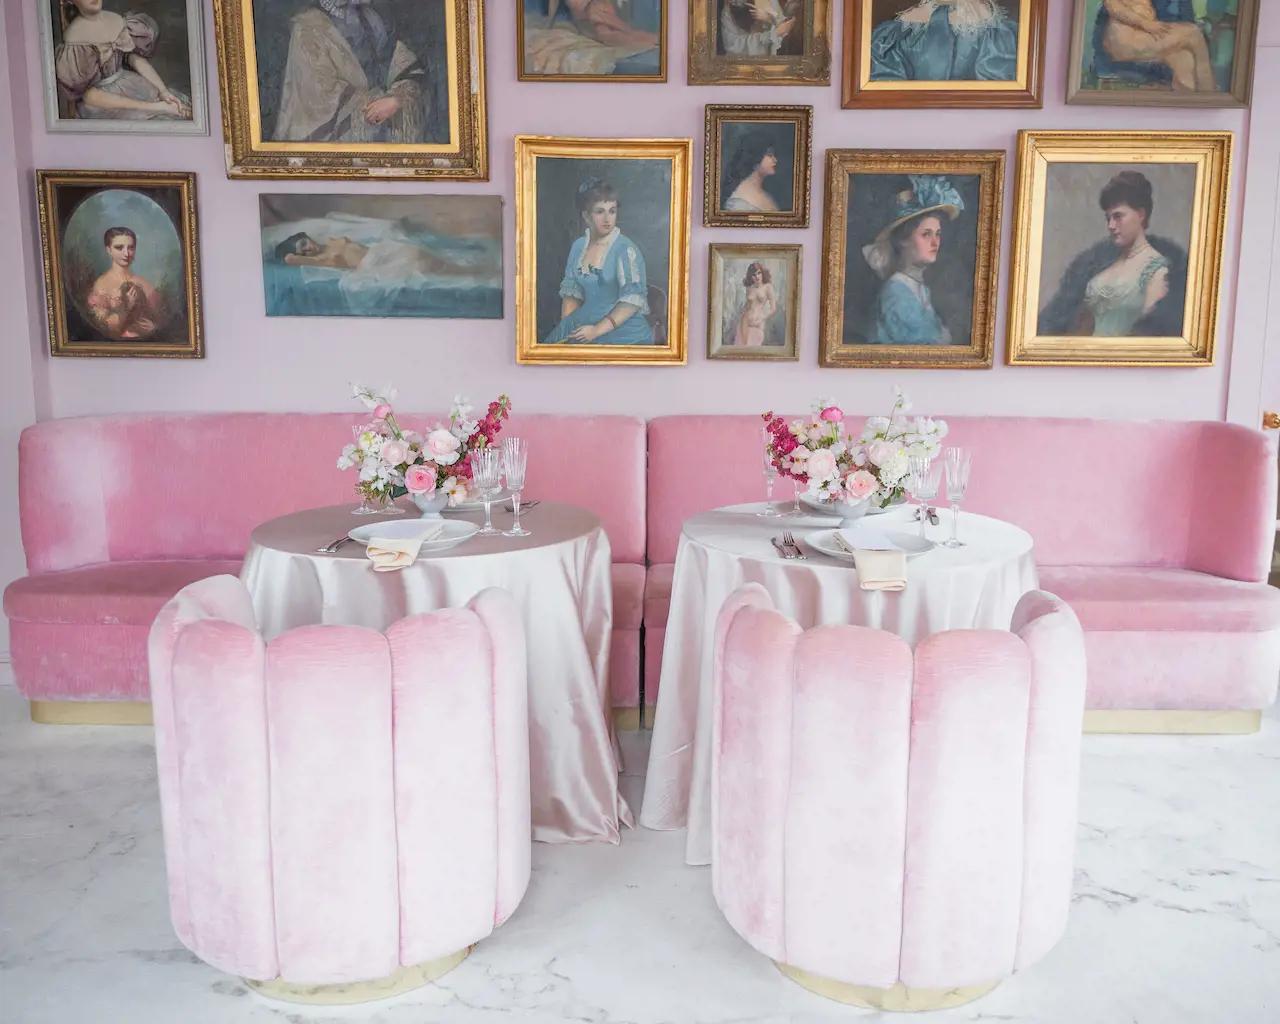 The Pink Room at the Ladyfinger Tea Lounge